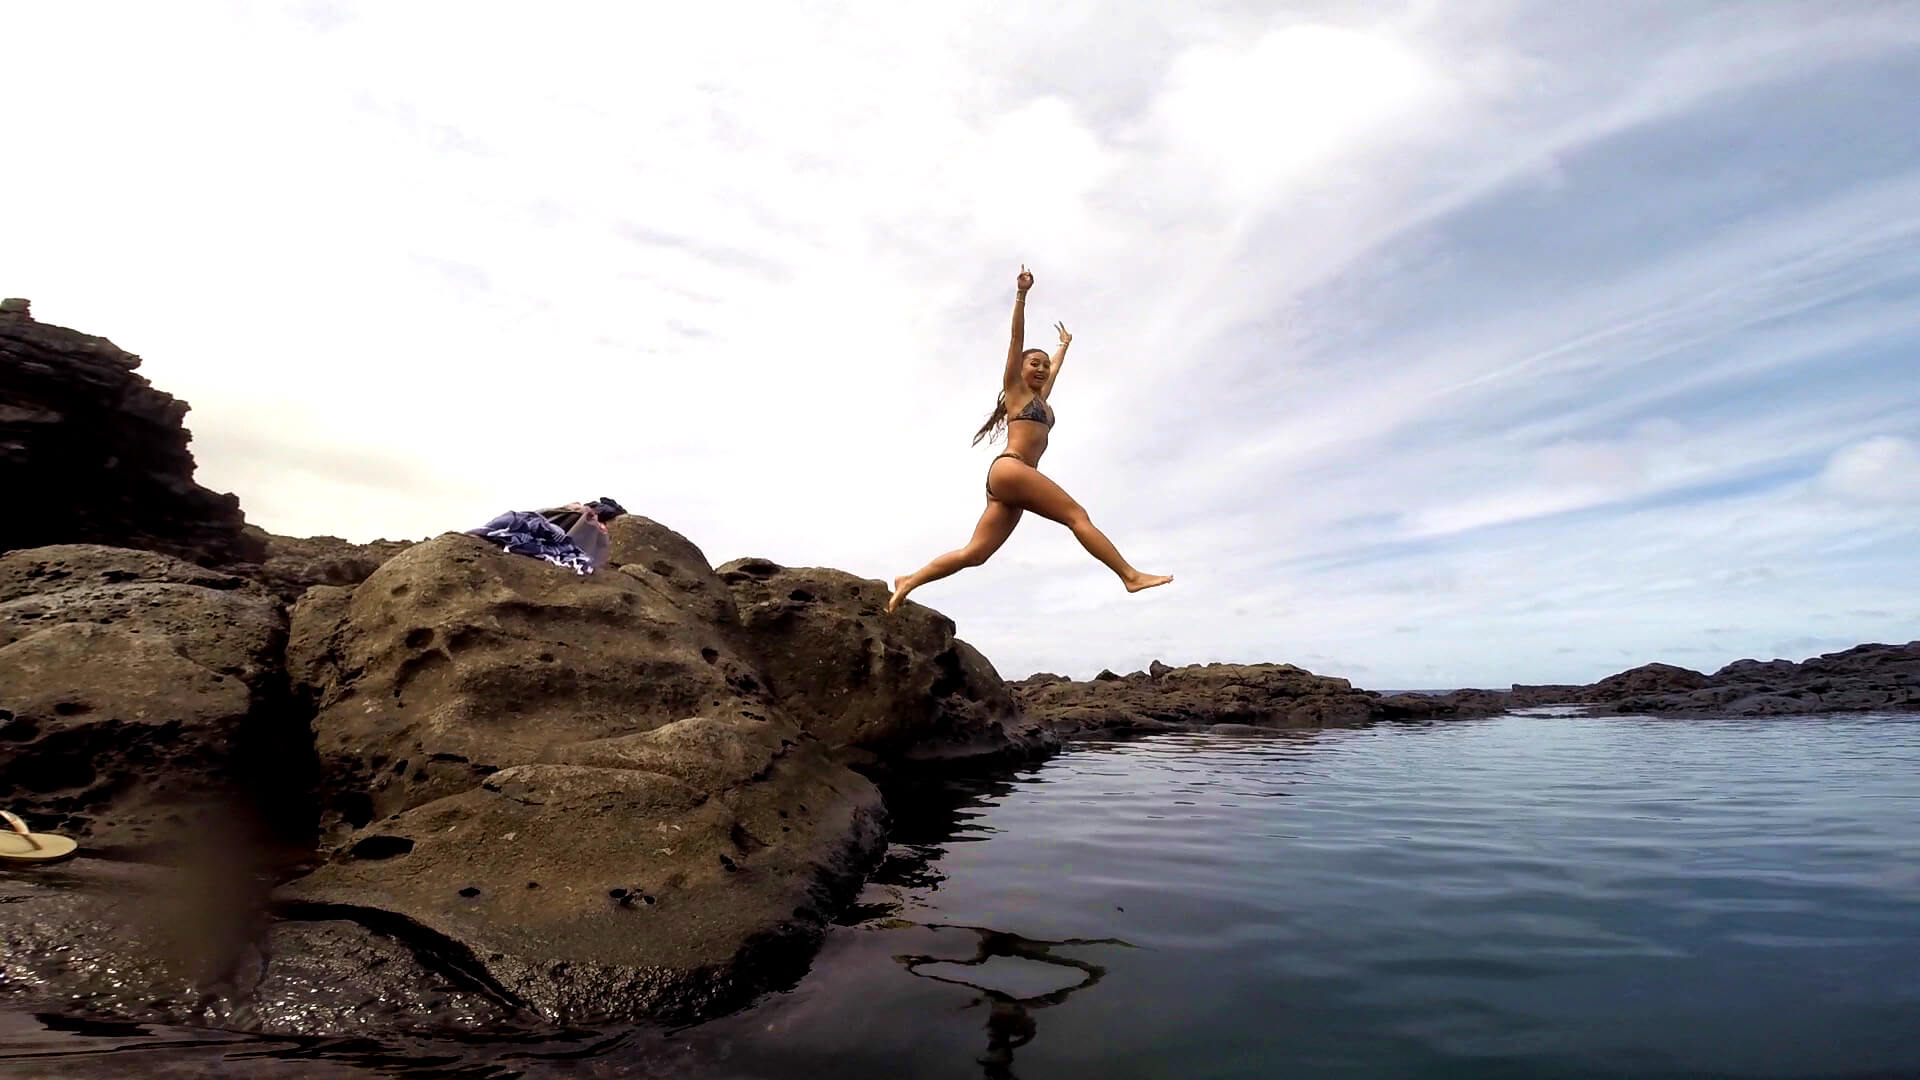 In action shot jumping into the tide pools in Maui